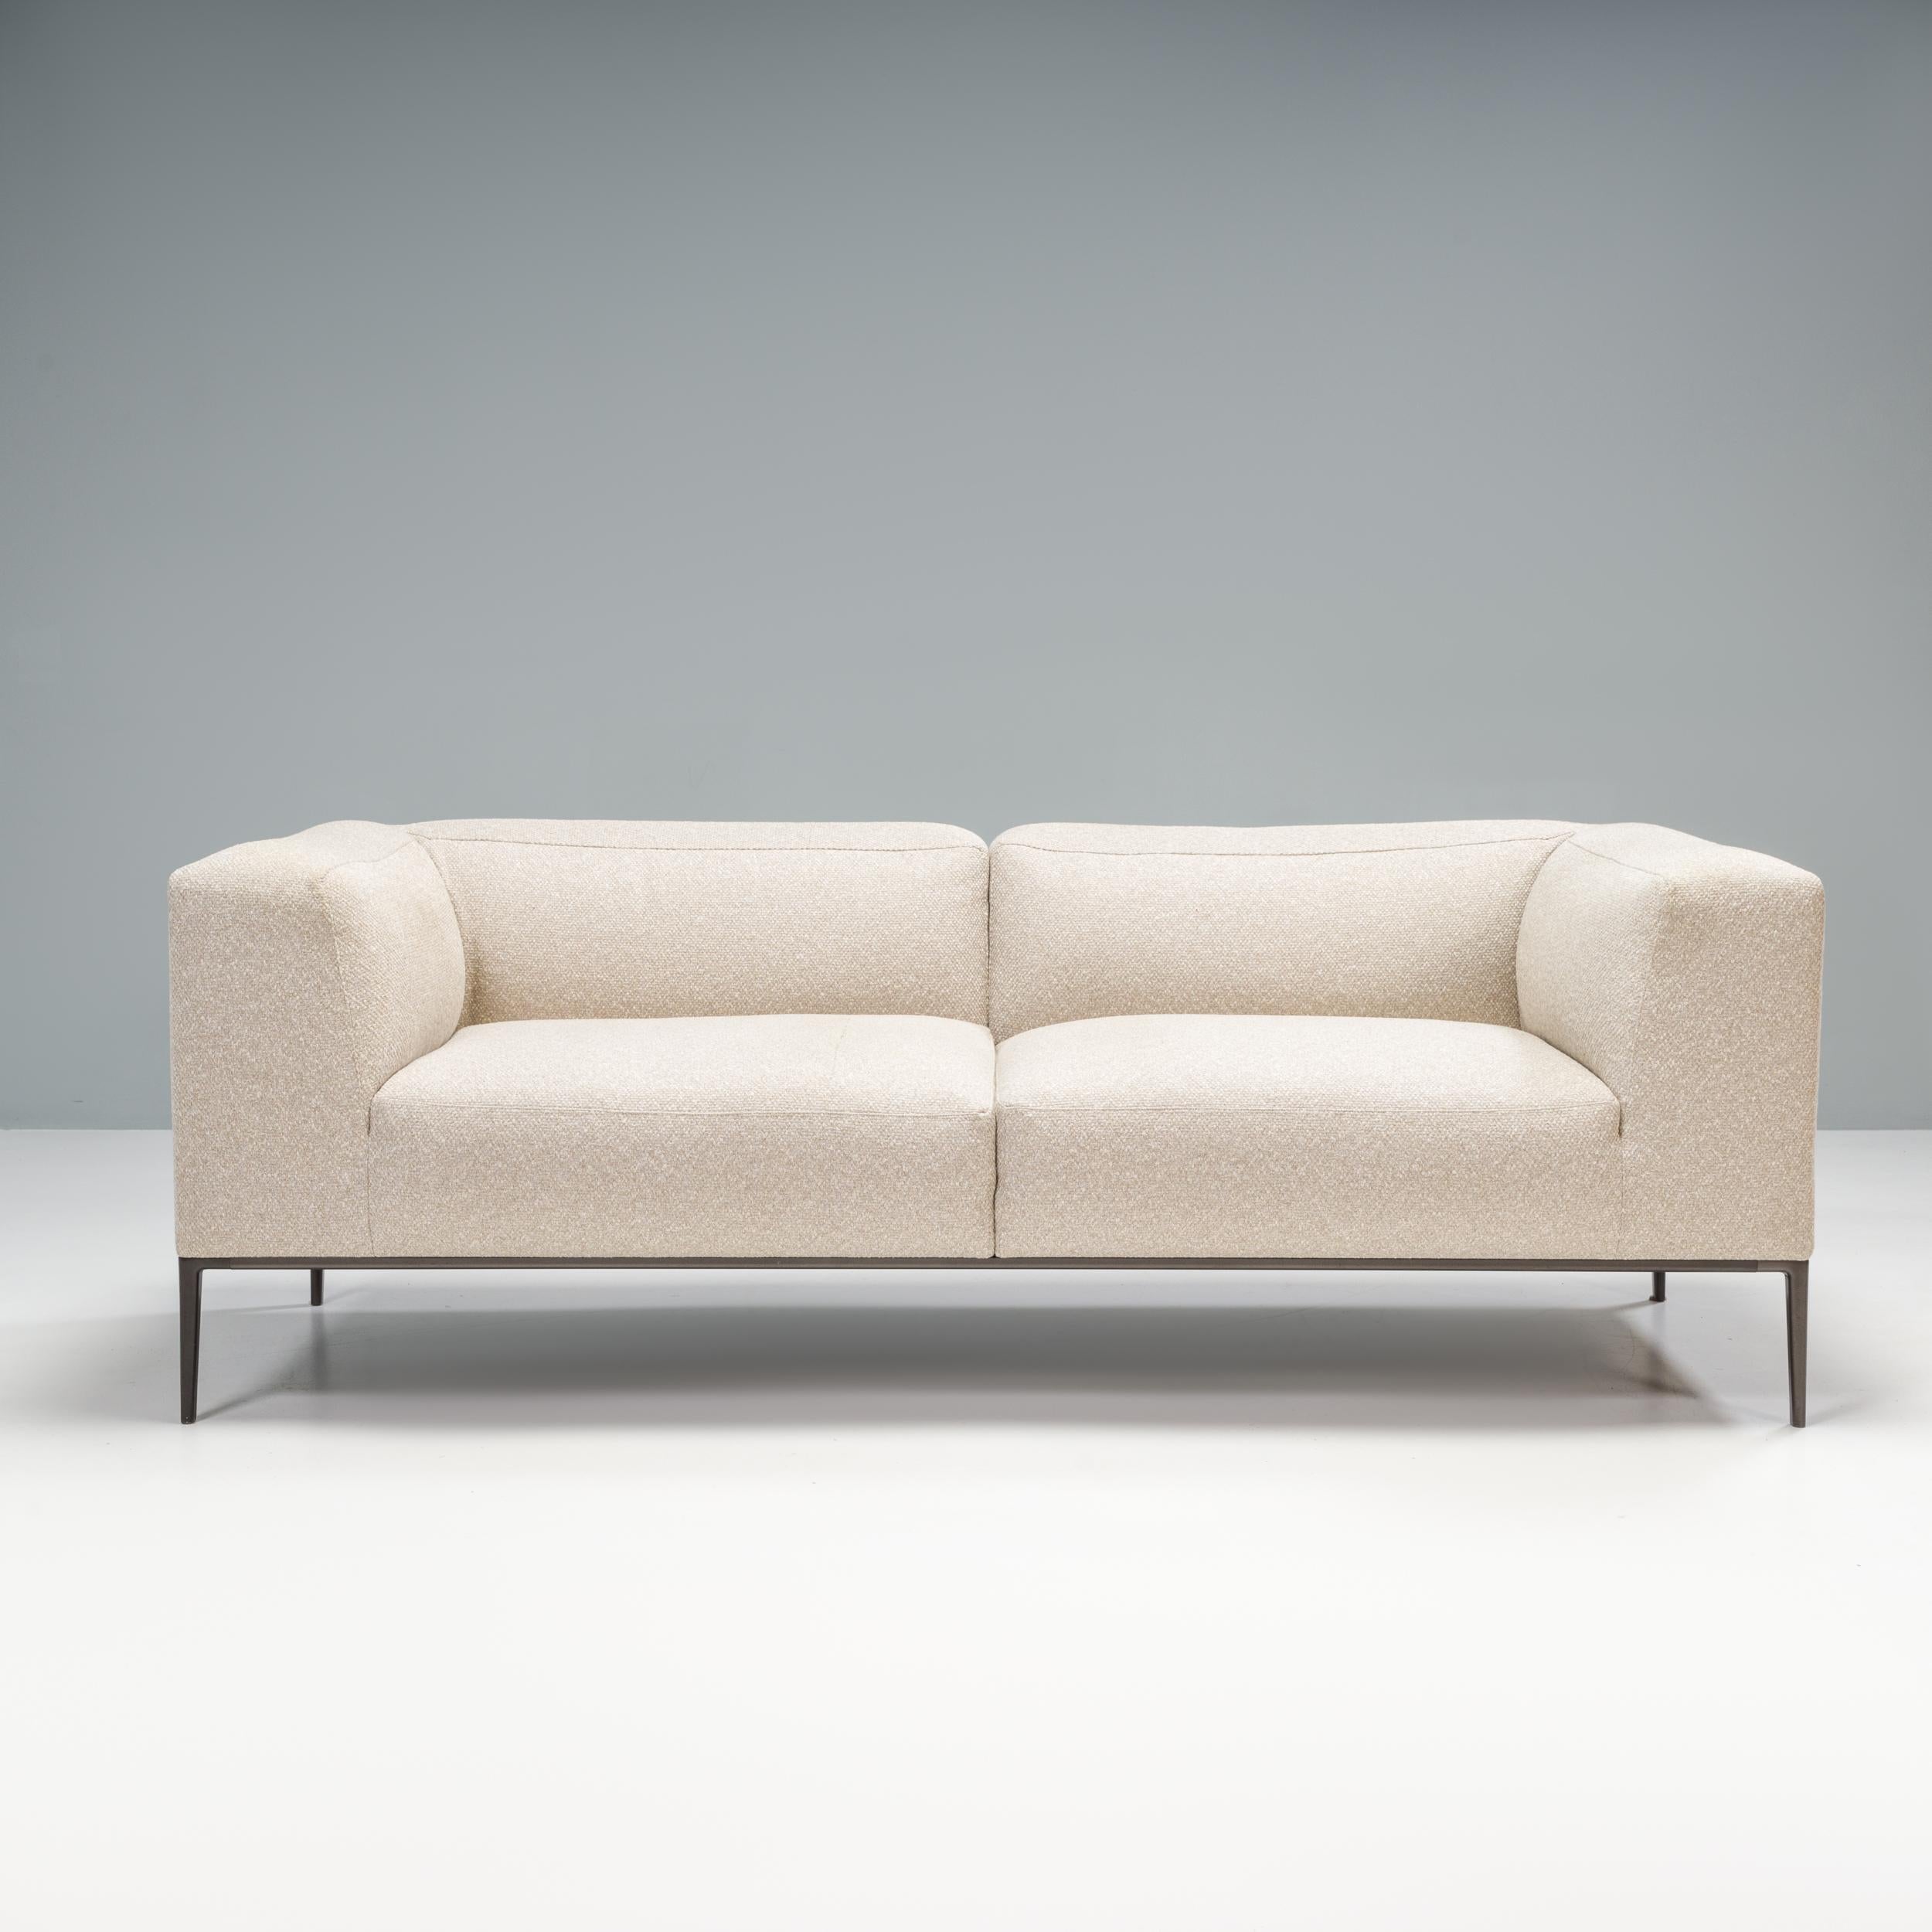 Originally designed by Antonio Citterio in 2015 for B&B Italia, the Michel Effe seating range continued to build on the design of Michel sofa from 2012, and is a fantastic example of modern furniture design.

The sofa is tuxedo in style with